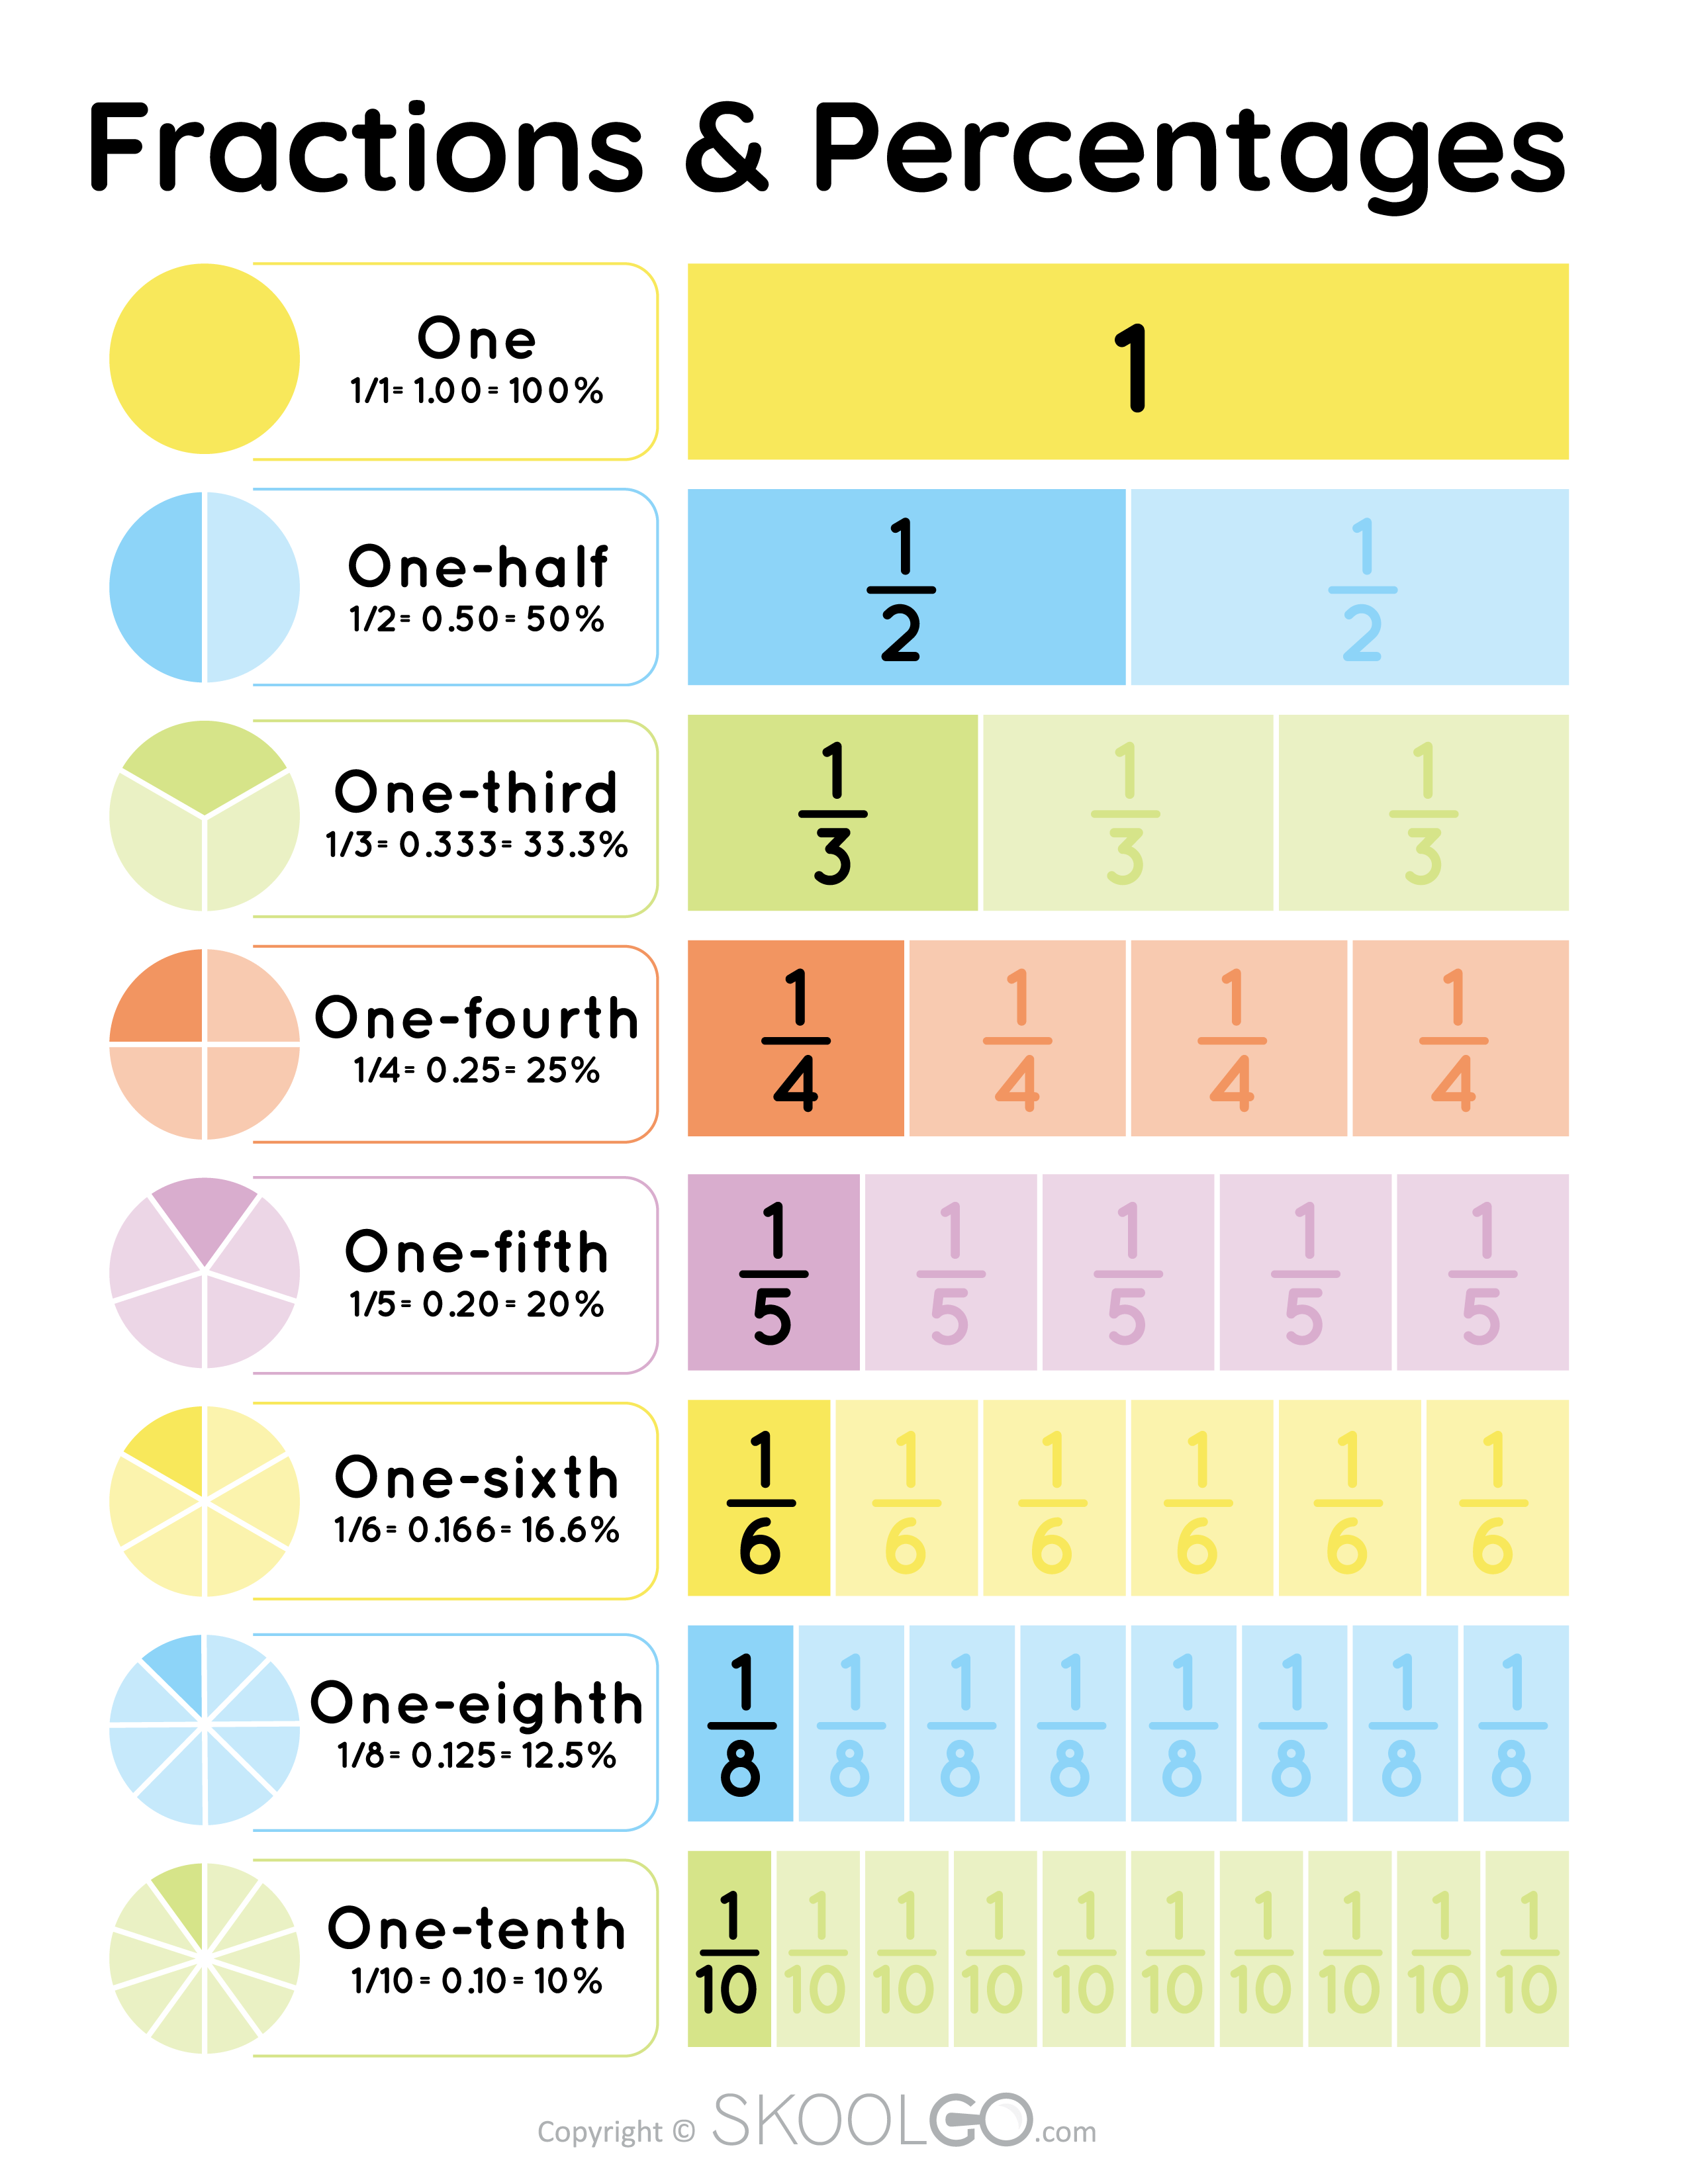 Fractions & Percentages - Free Poster